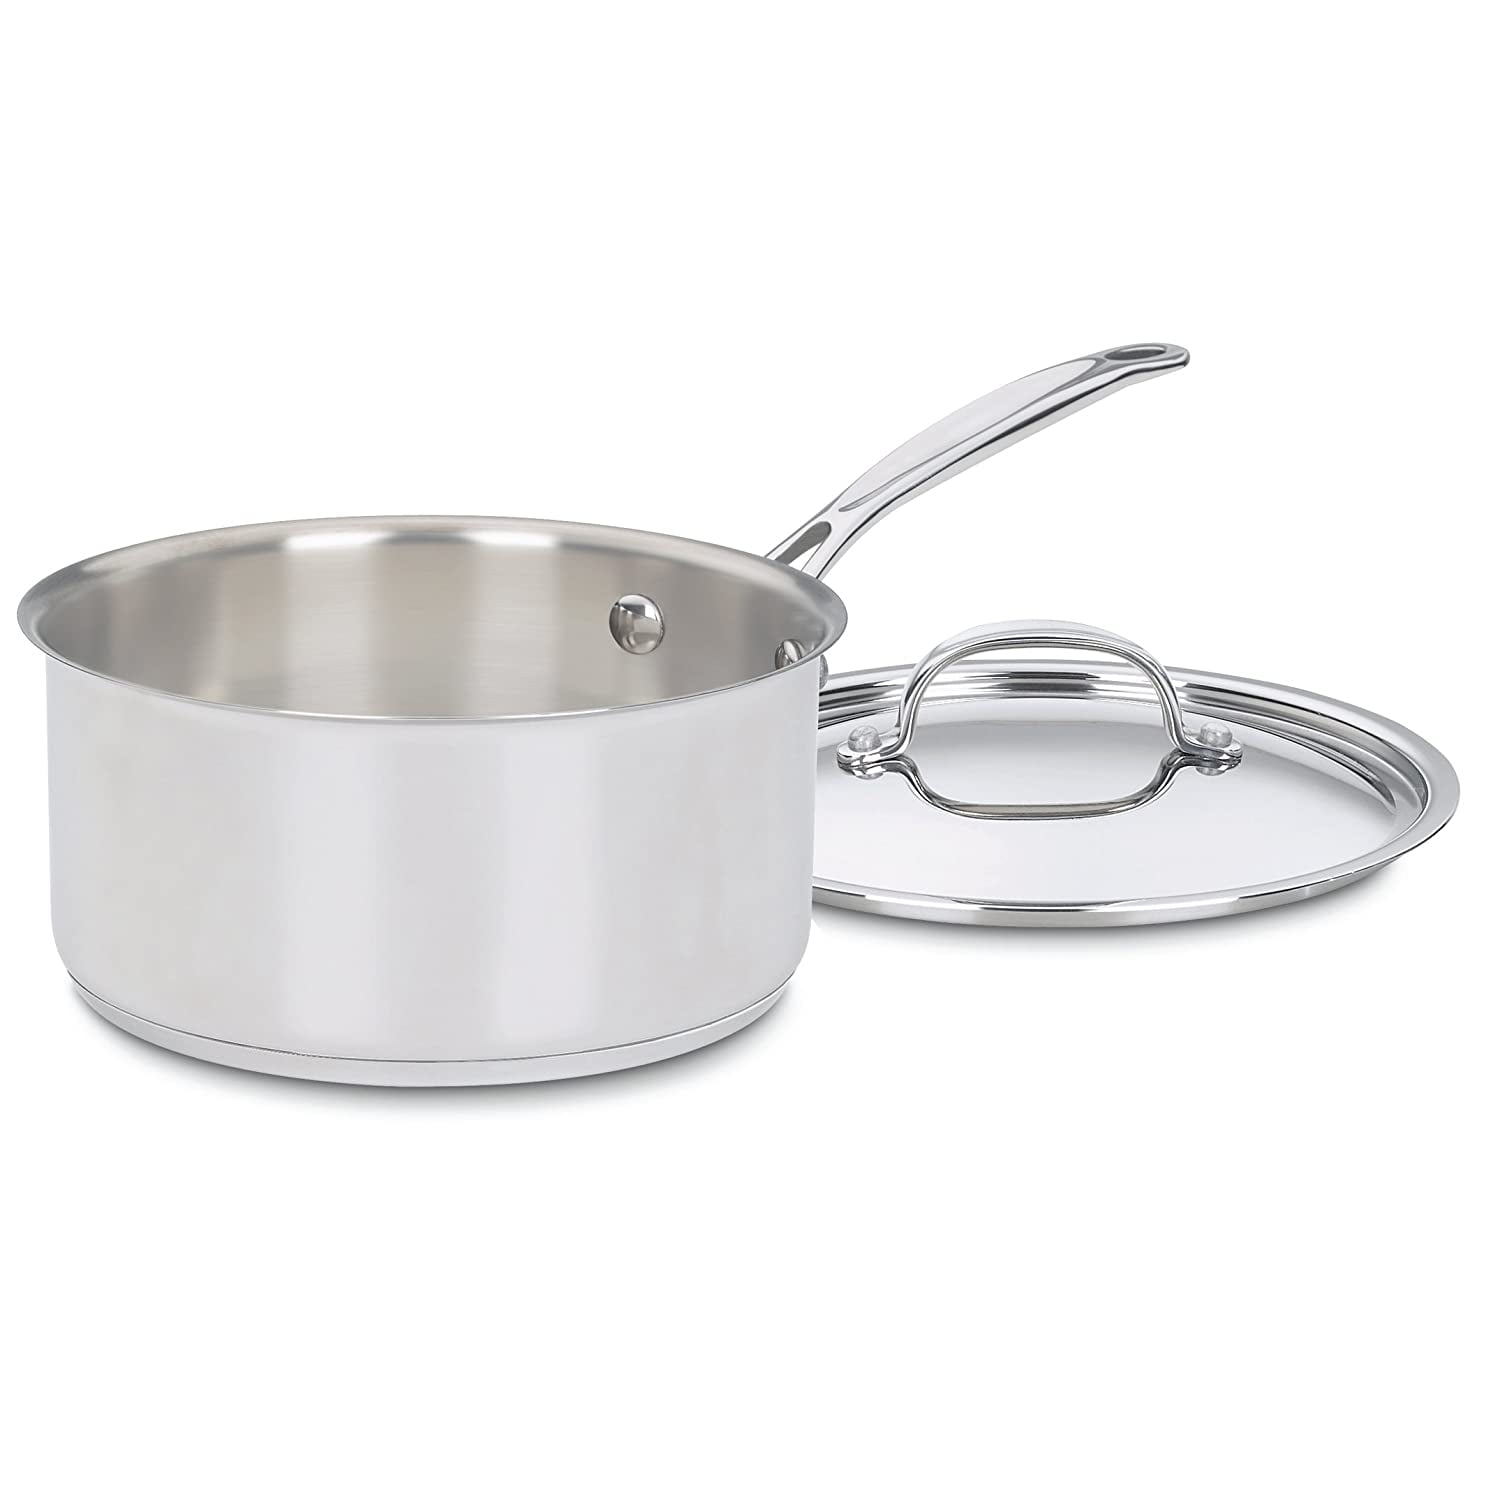 Cuisinart MCP193-18N MultiClad Pro Stainless Steel 3-Quart Saucepan with Cover 